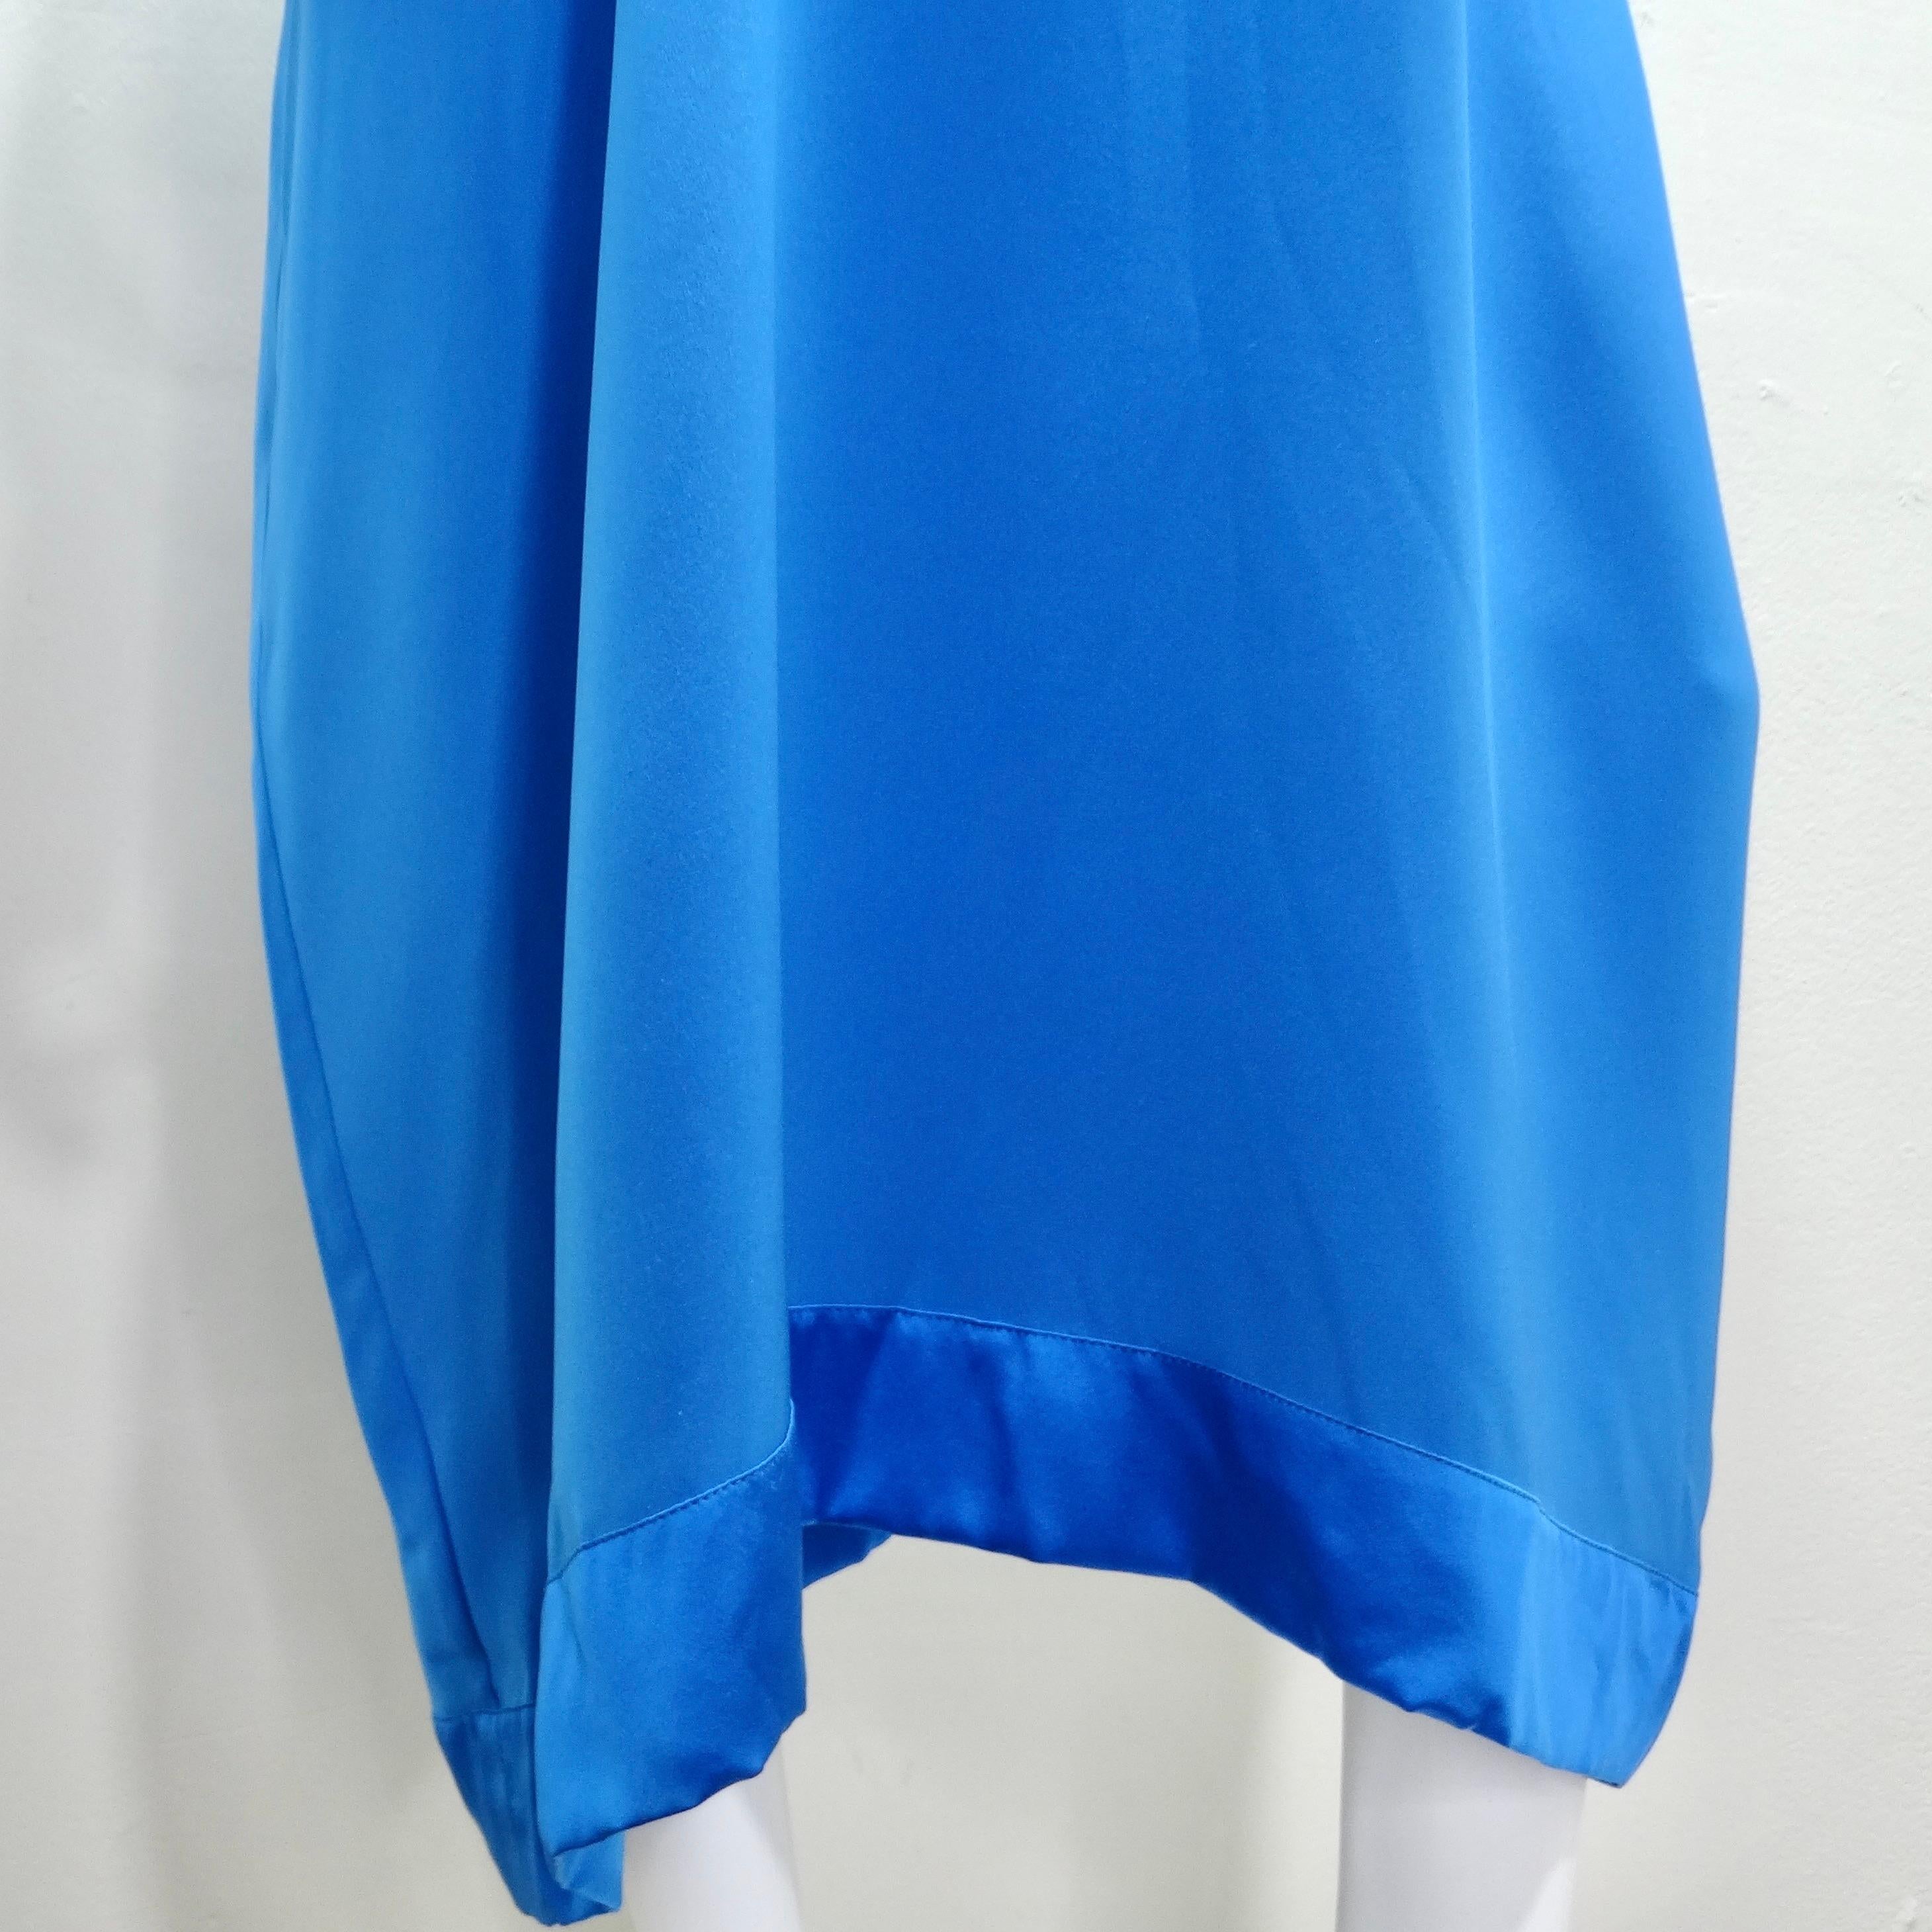 The Albert Capraro 1970s Blue Kaftan Dress sounds like a fabulous vintage piece with its striking cobalt blue color and elegant design.

The kaftan style is known for its loose and flowy silhouette, making it comfortable and breathable to wear. The